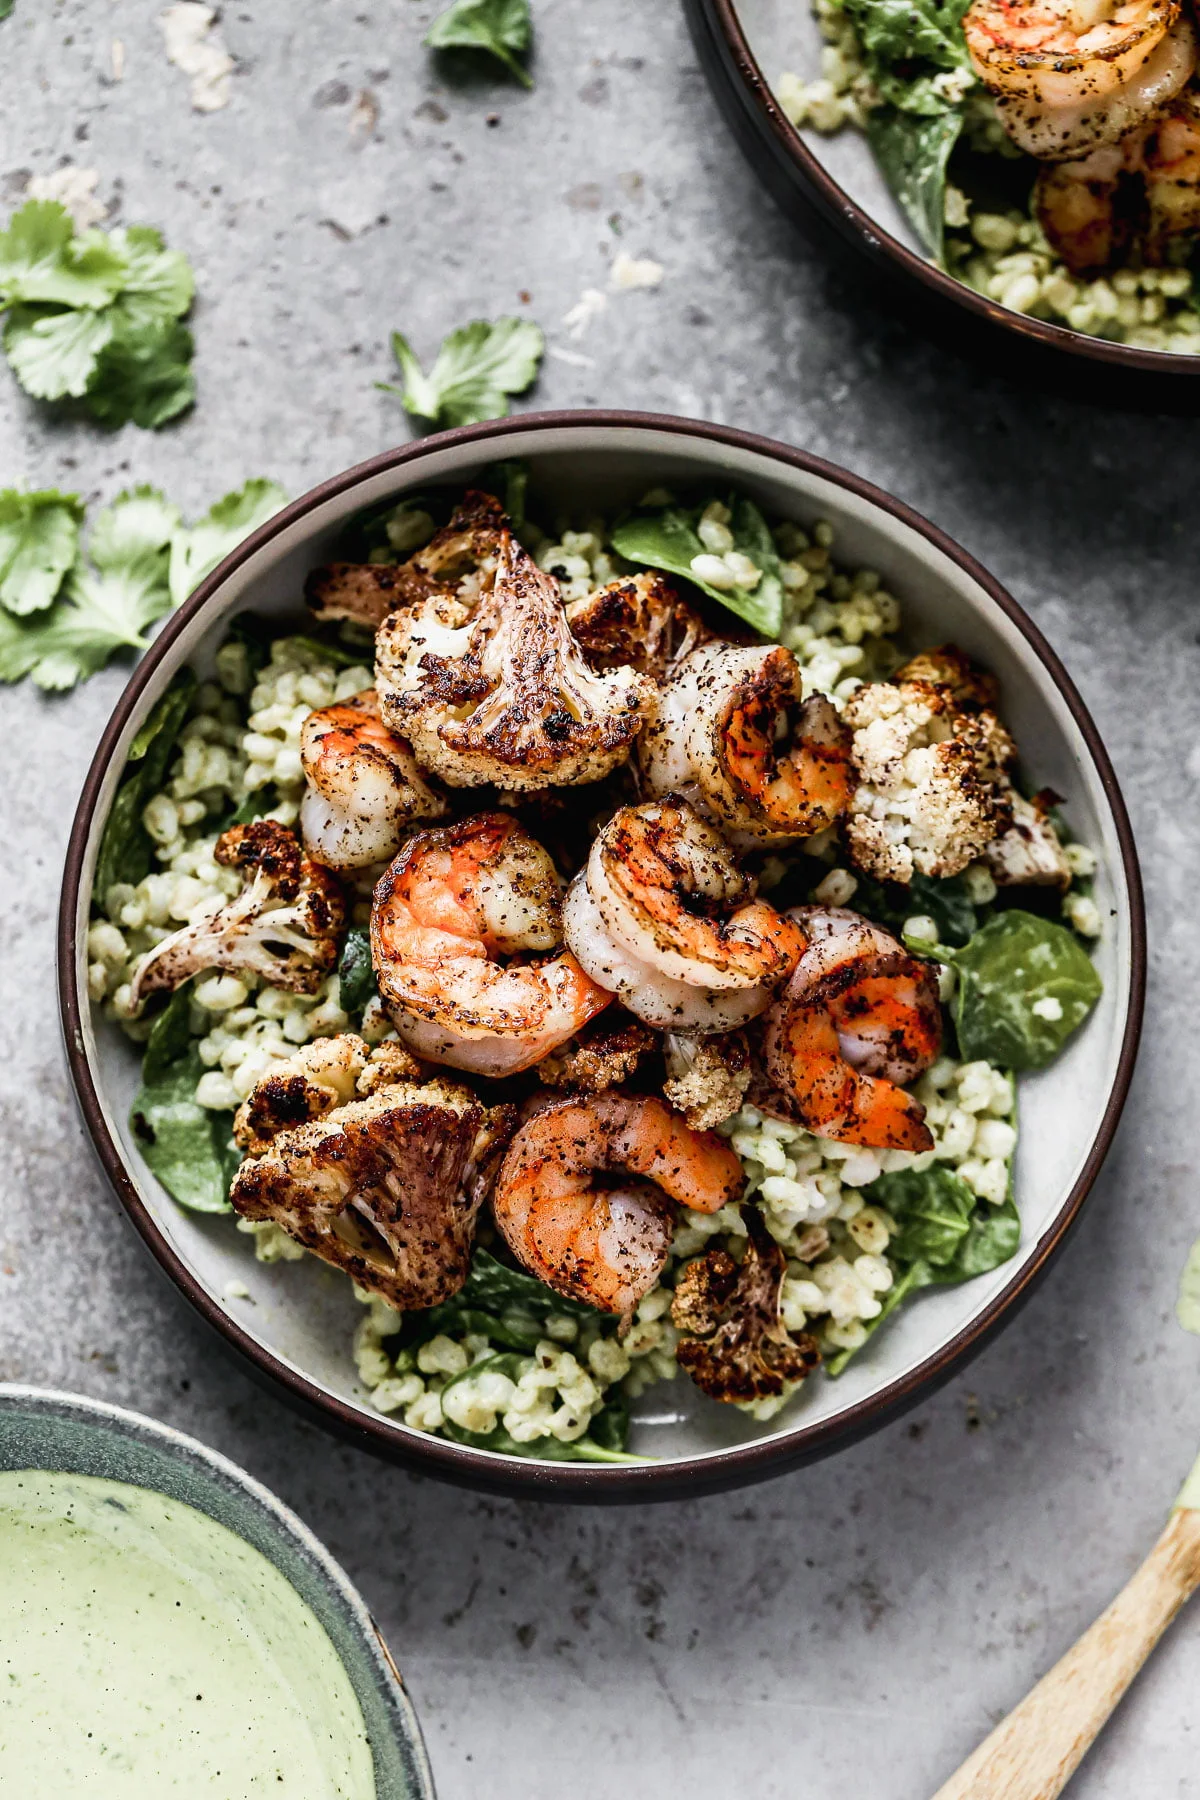 Nutty barley tossed in a zippy green tahini sauce, lemony sumac-roasted cauliflower and shrimp, and pops of crunchy pine nuts are the makings of our Green Tahini Shrimp Bowls - our new favorite way to do healthy. Make everything and serve the day of or pack it up and keep in the fridge to serve thought the week. 